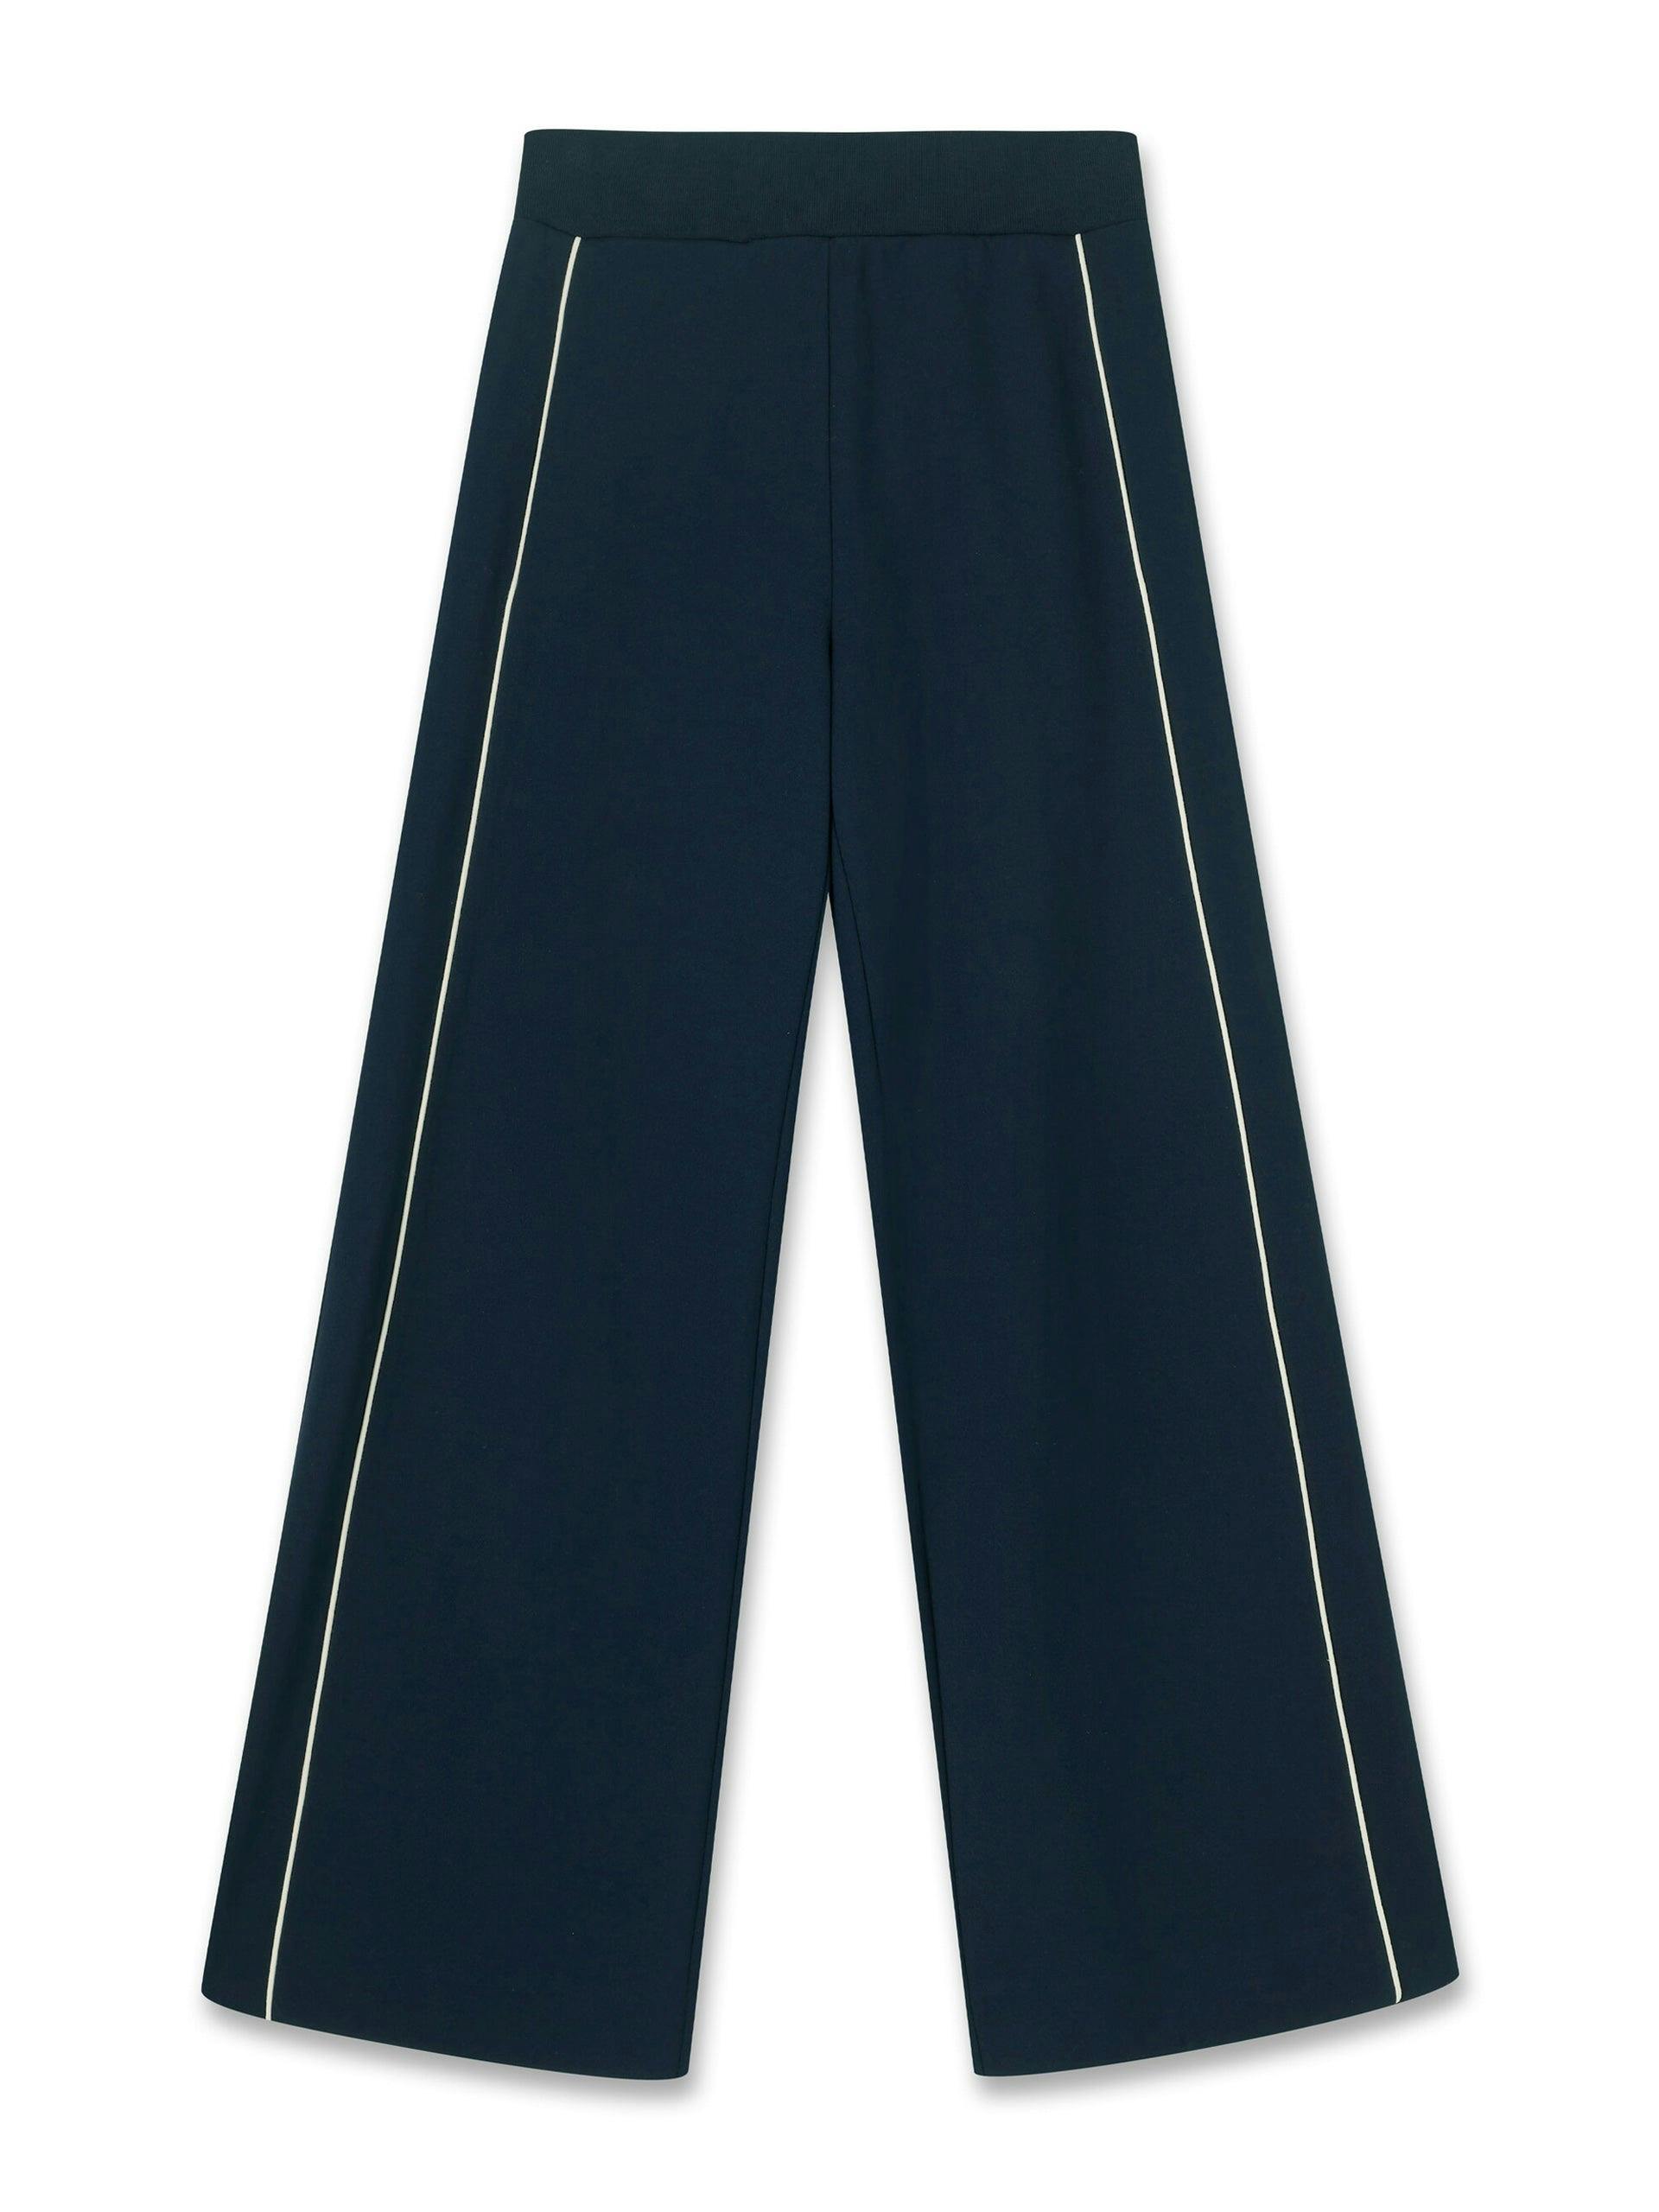 High-waisted ribbed navy blue track pants